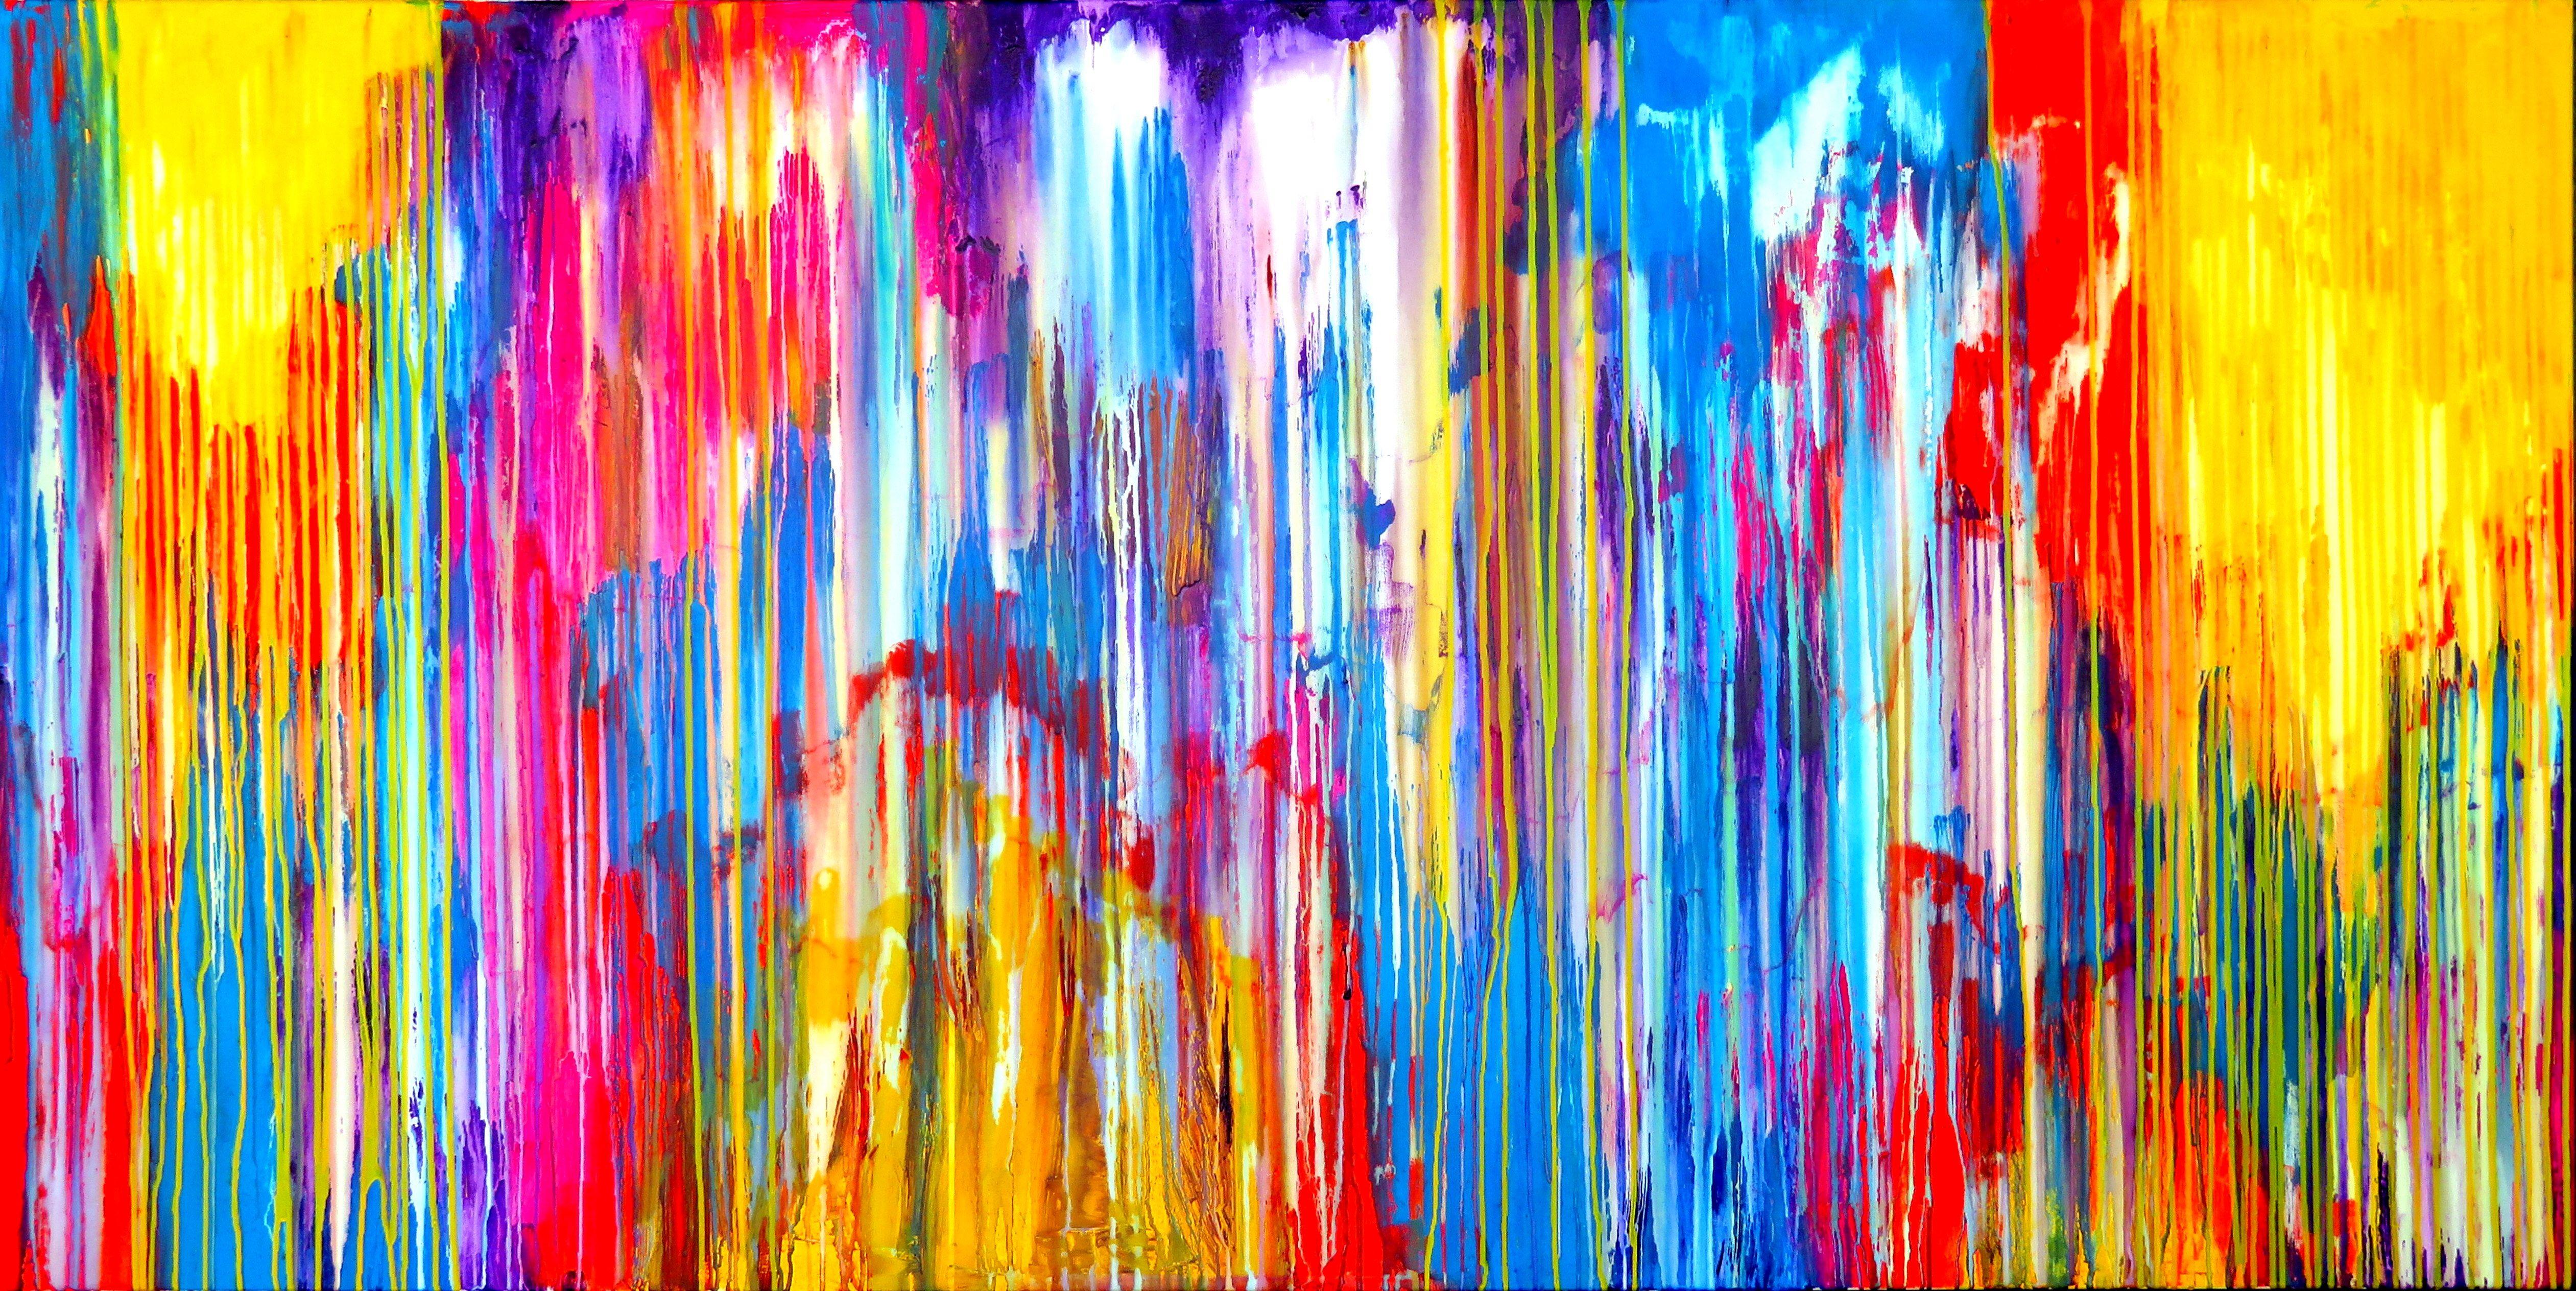 Carla Sá Fernandes Abstract Painting - The Emotional Creation #182, Painting, Acrylic on Canvas